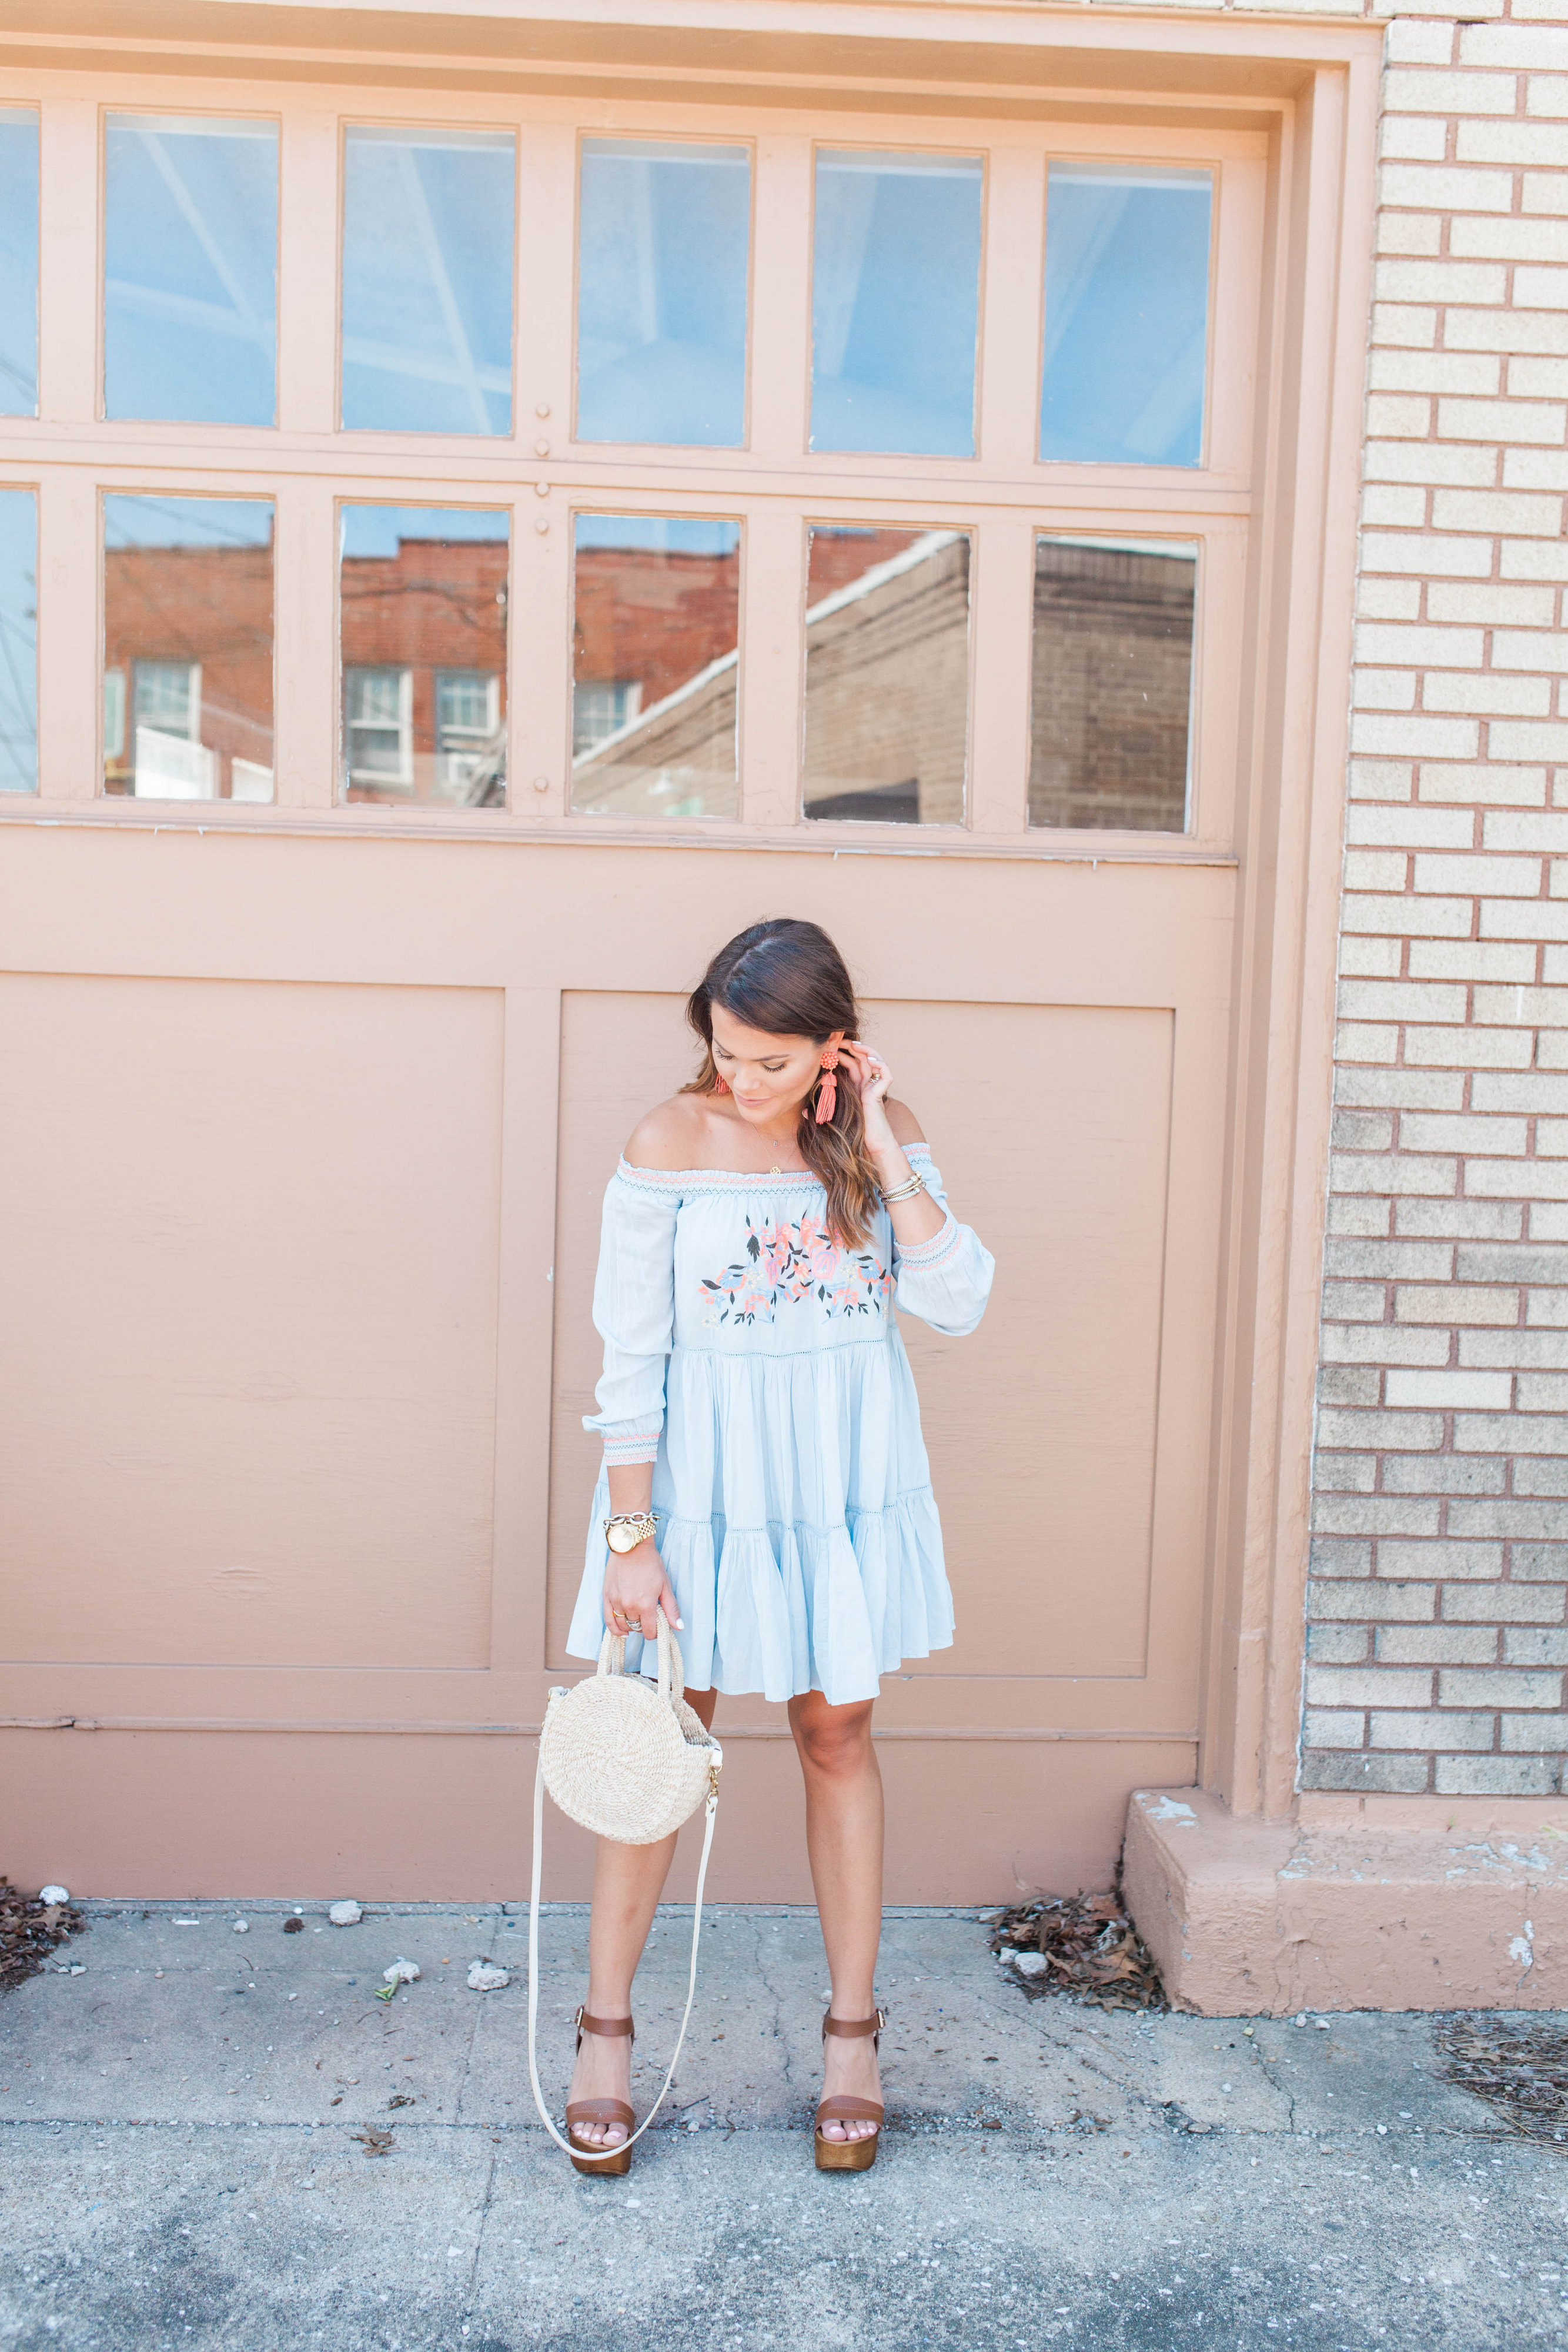 Embroidered OTS Dress / Free People Dress